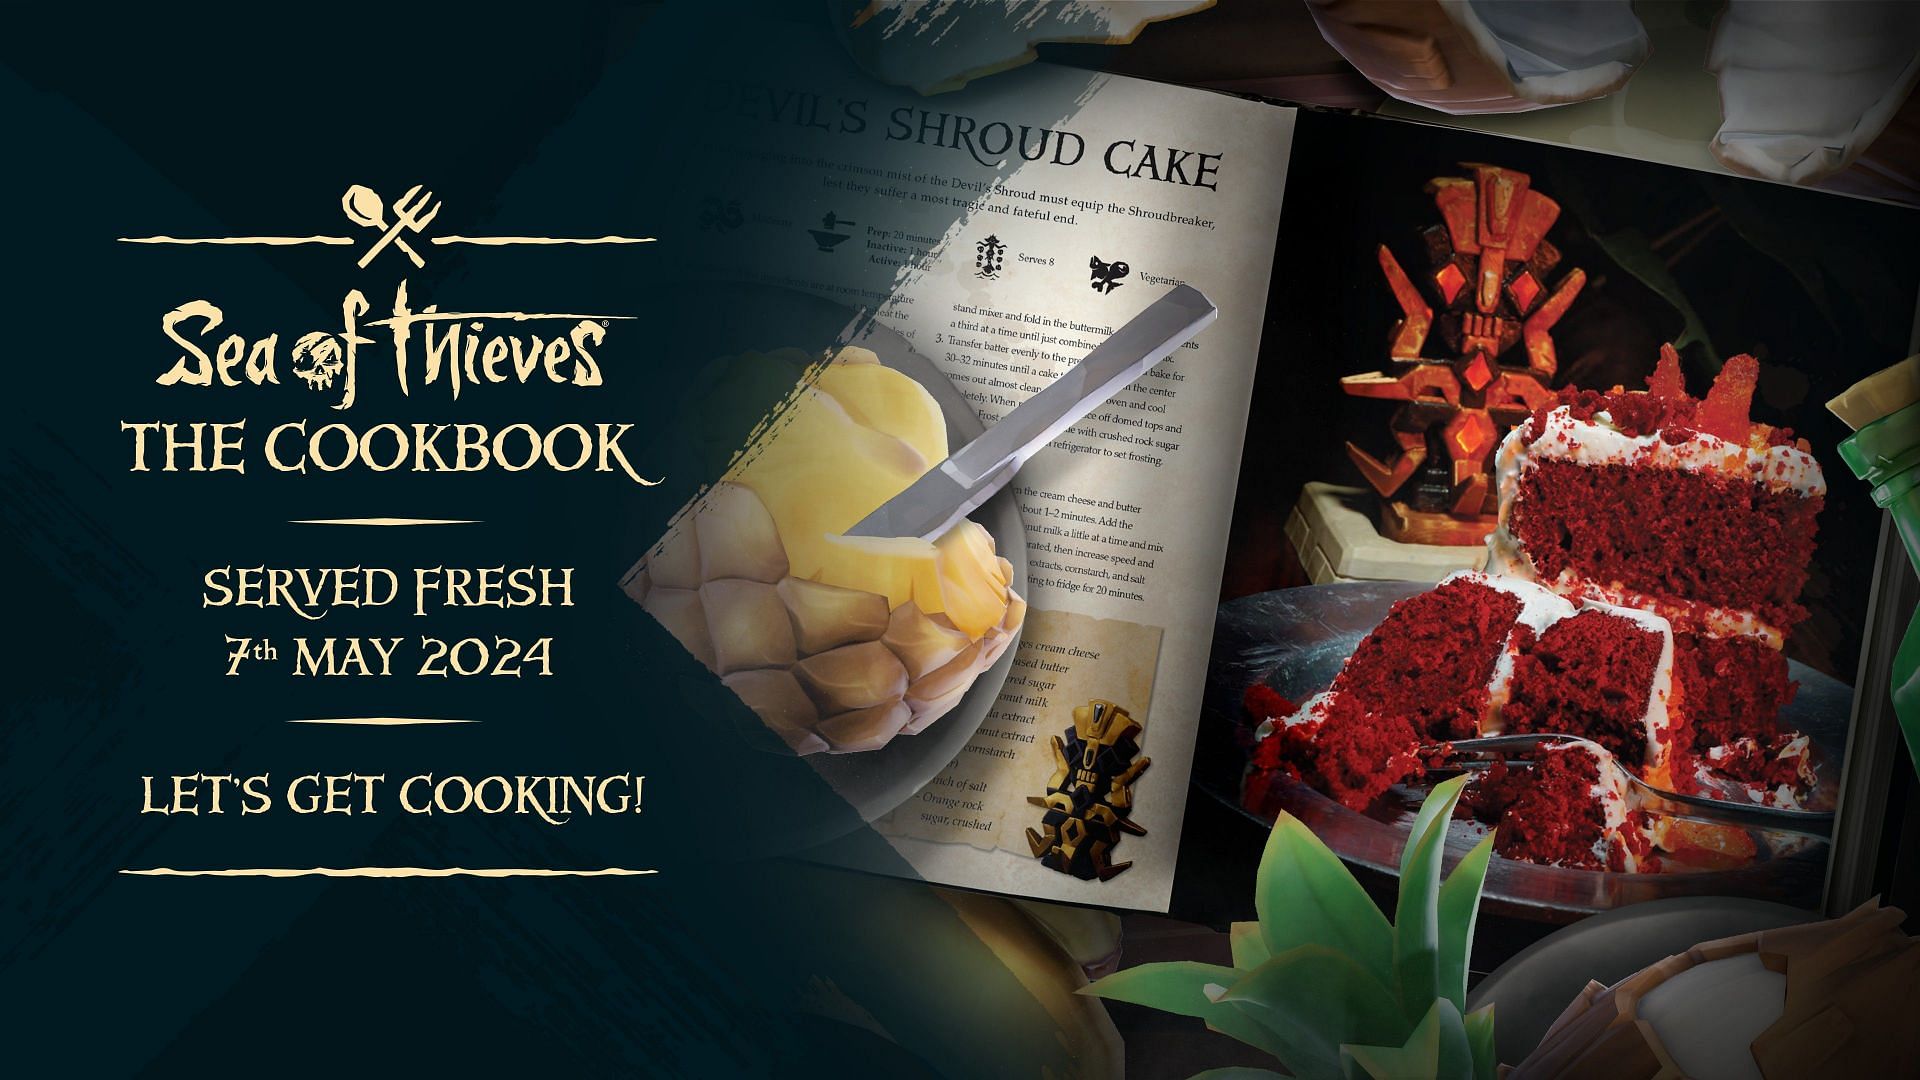 Sea of Thieves The Cookbook.